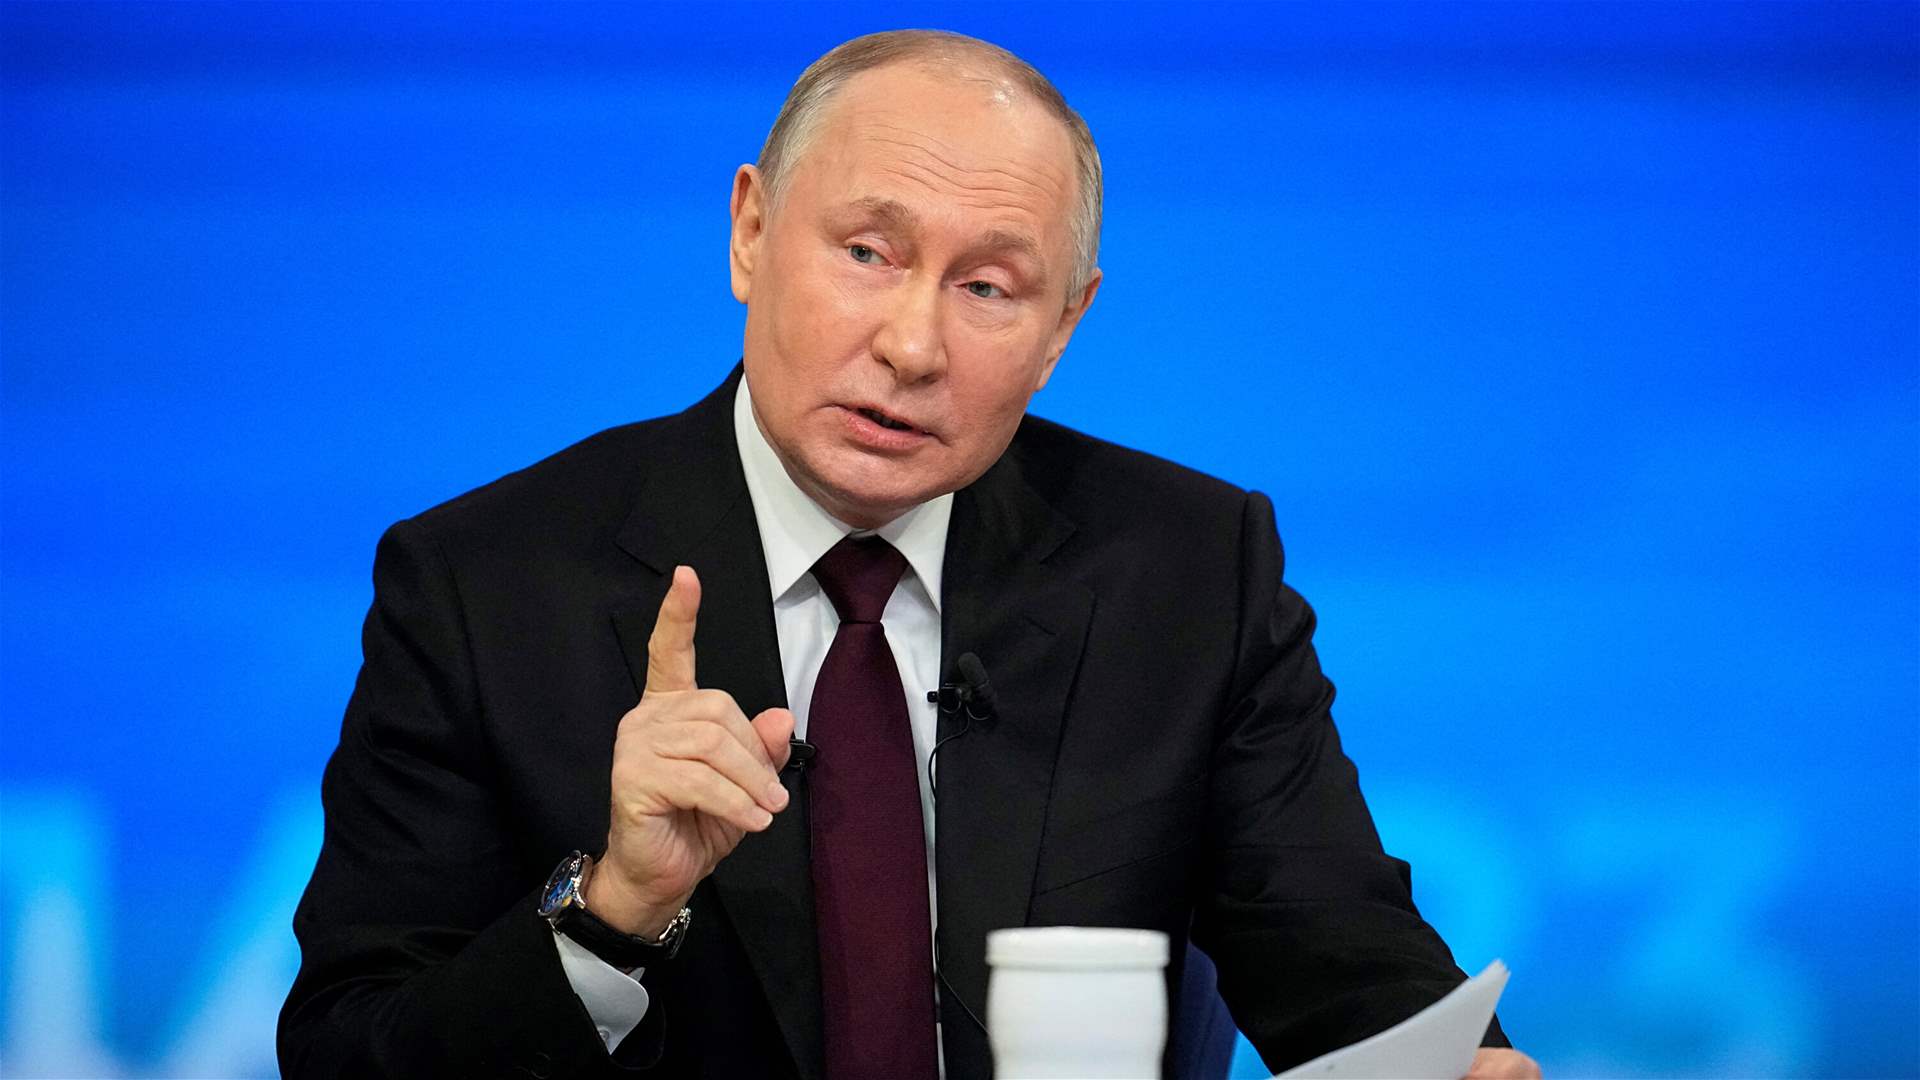 Putin: The course of war in Ukraine is &quot;life or death&quot; issue for Russia